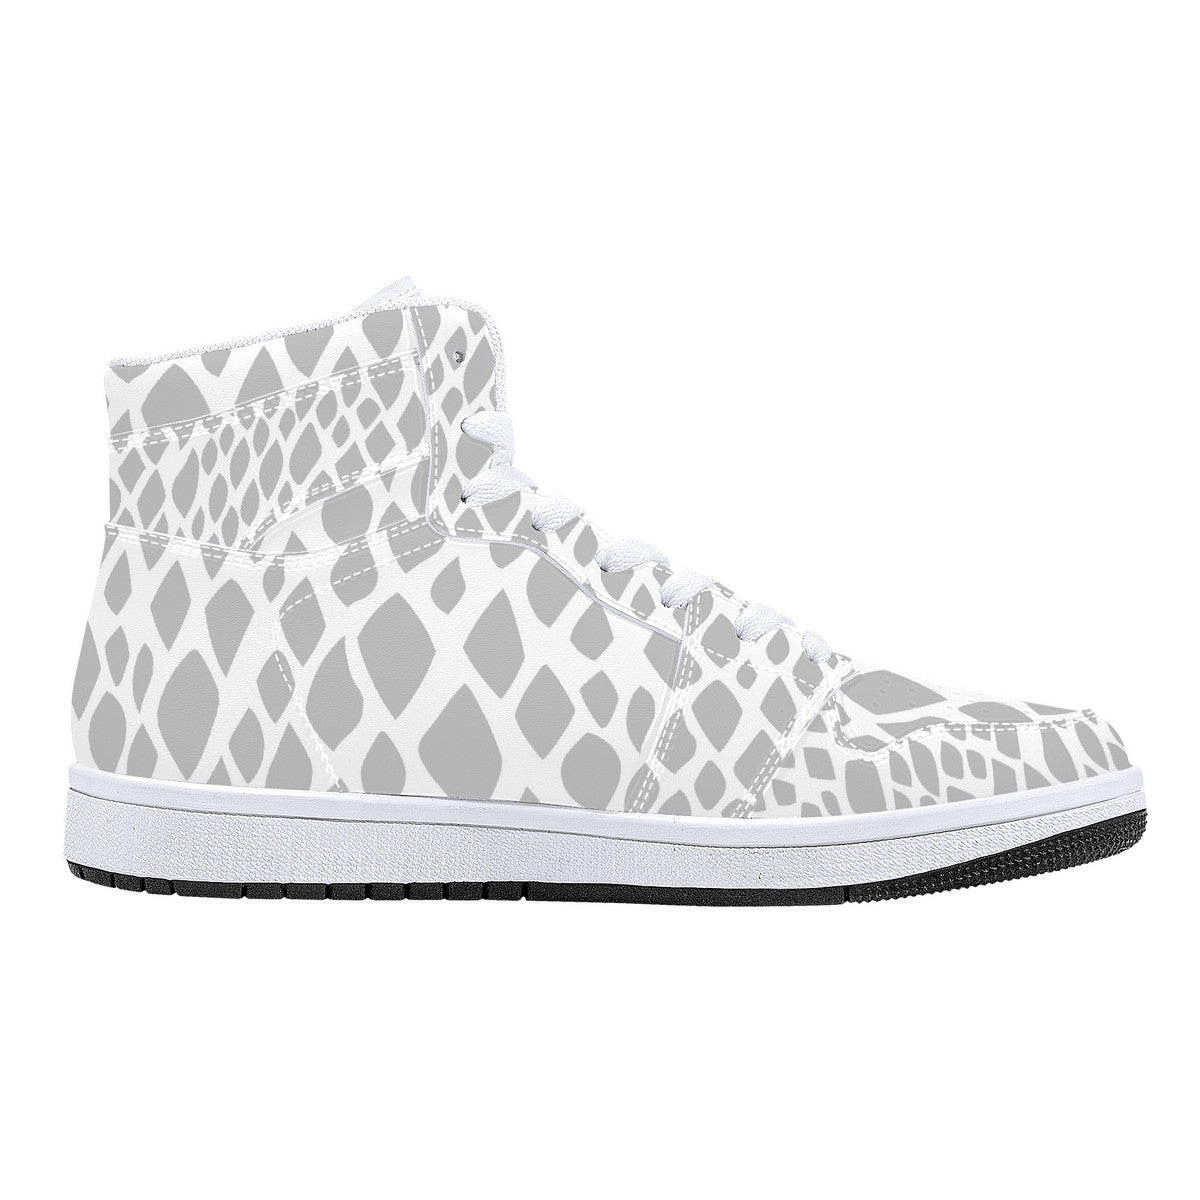 "Nix Snake" High-Top Synthetic Leather Sneakers